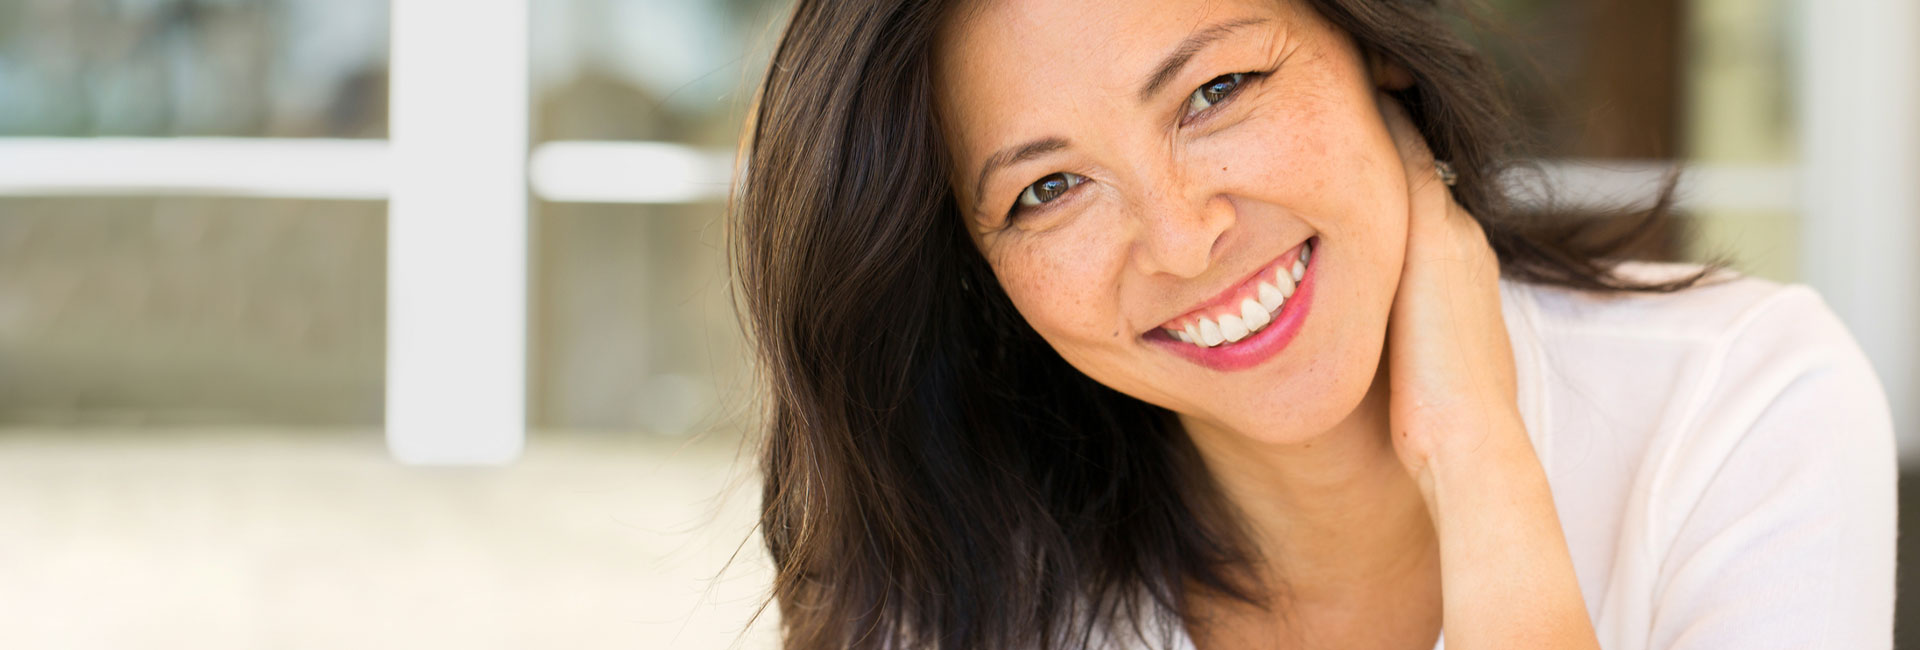 Portrait of an Asian woman smiling